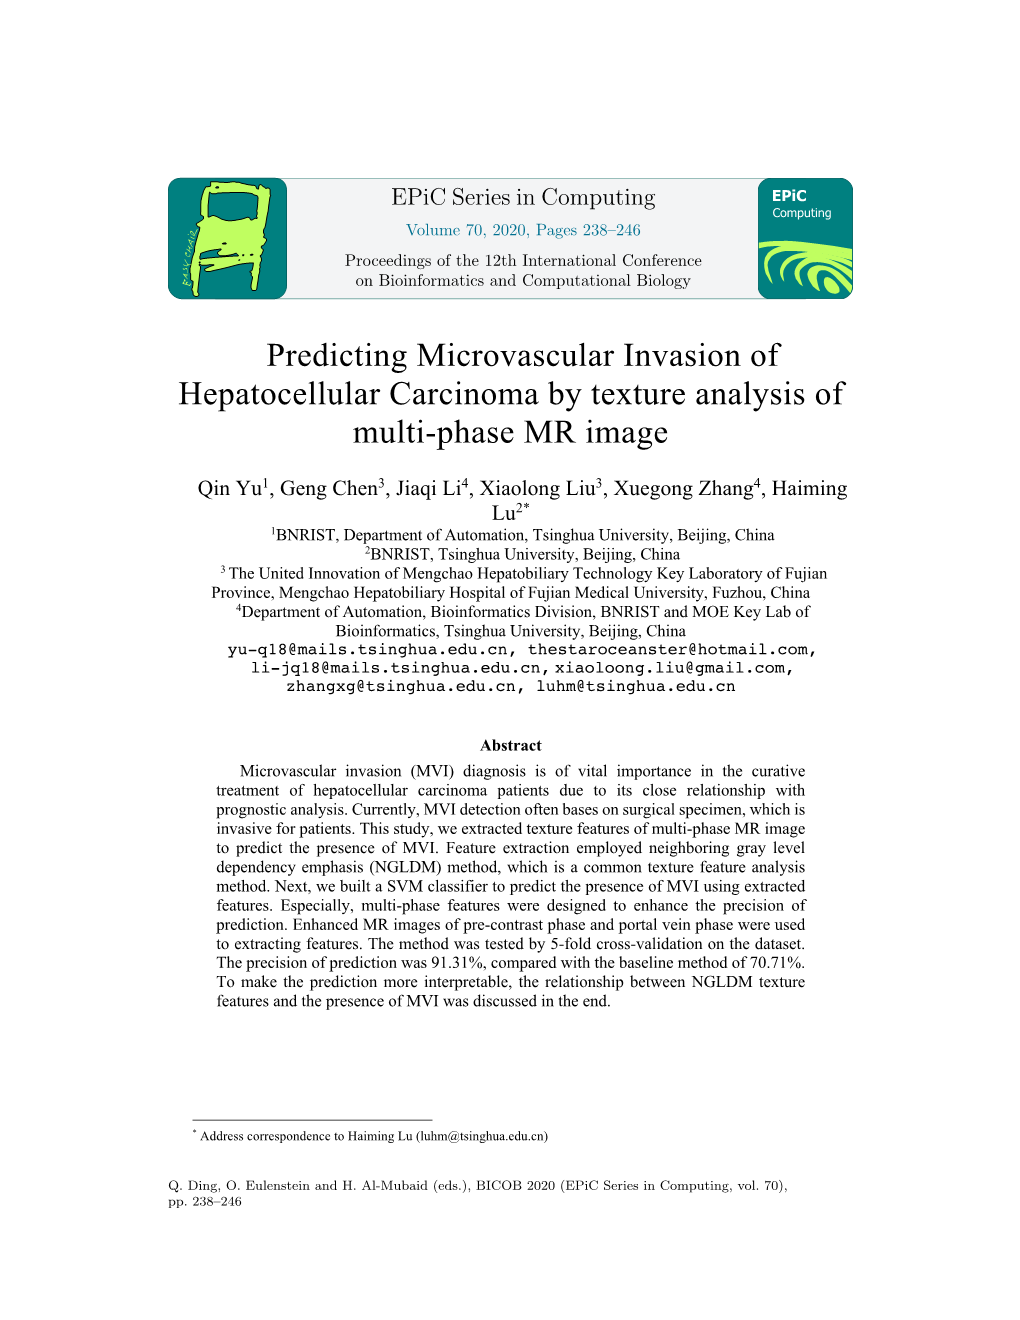 Predicting Microvascular Invasion of Hepatocellular Carcinoma by Texture Analysis of Multi-Phase MR Image